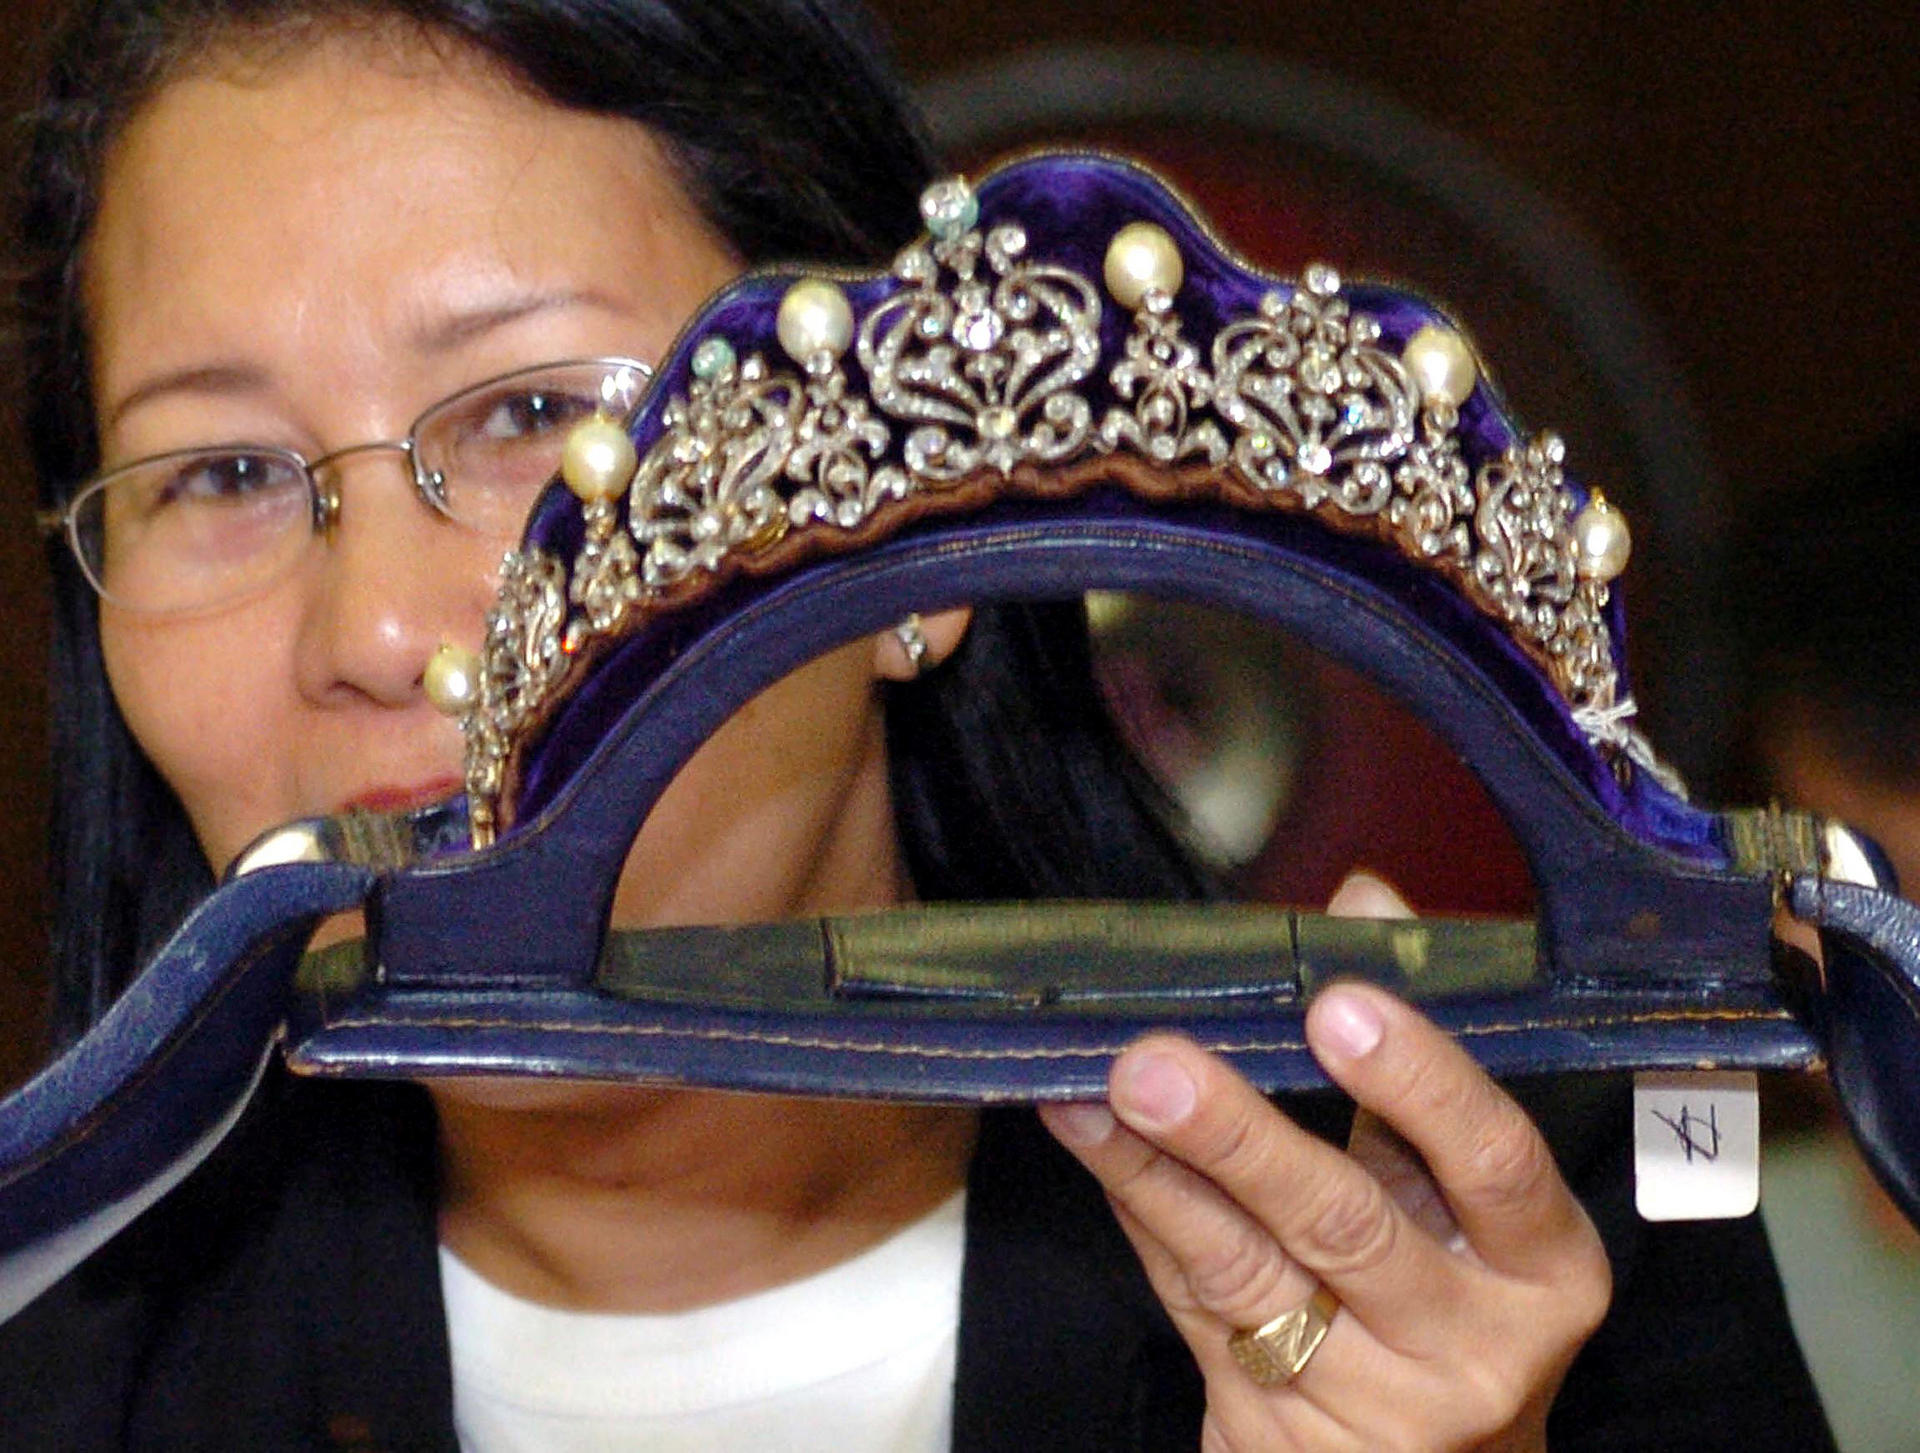 Ill-gotten' Imelda Marcos jewellery could auctioned | South China Morning Post